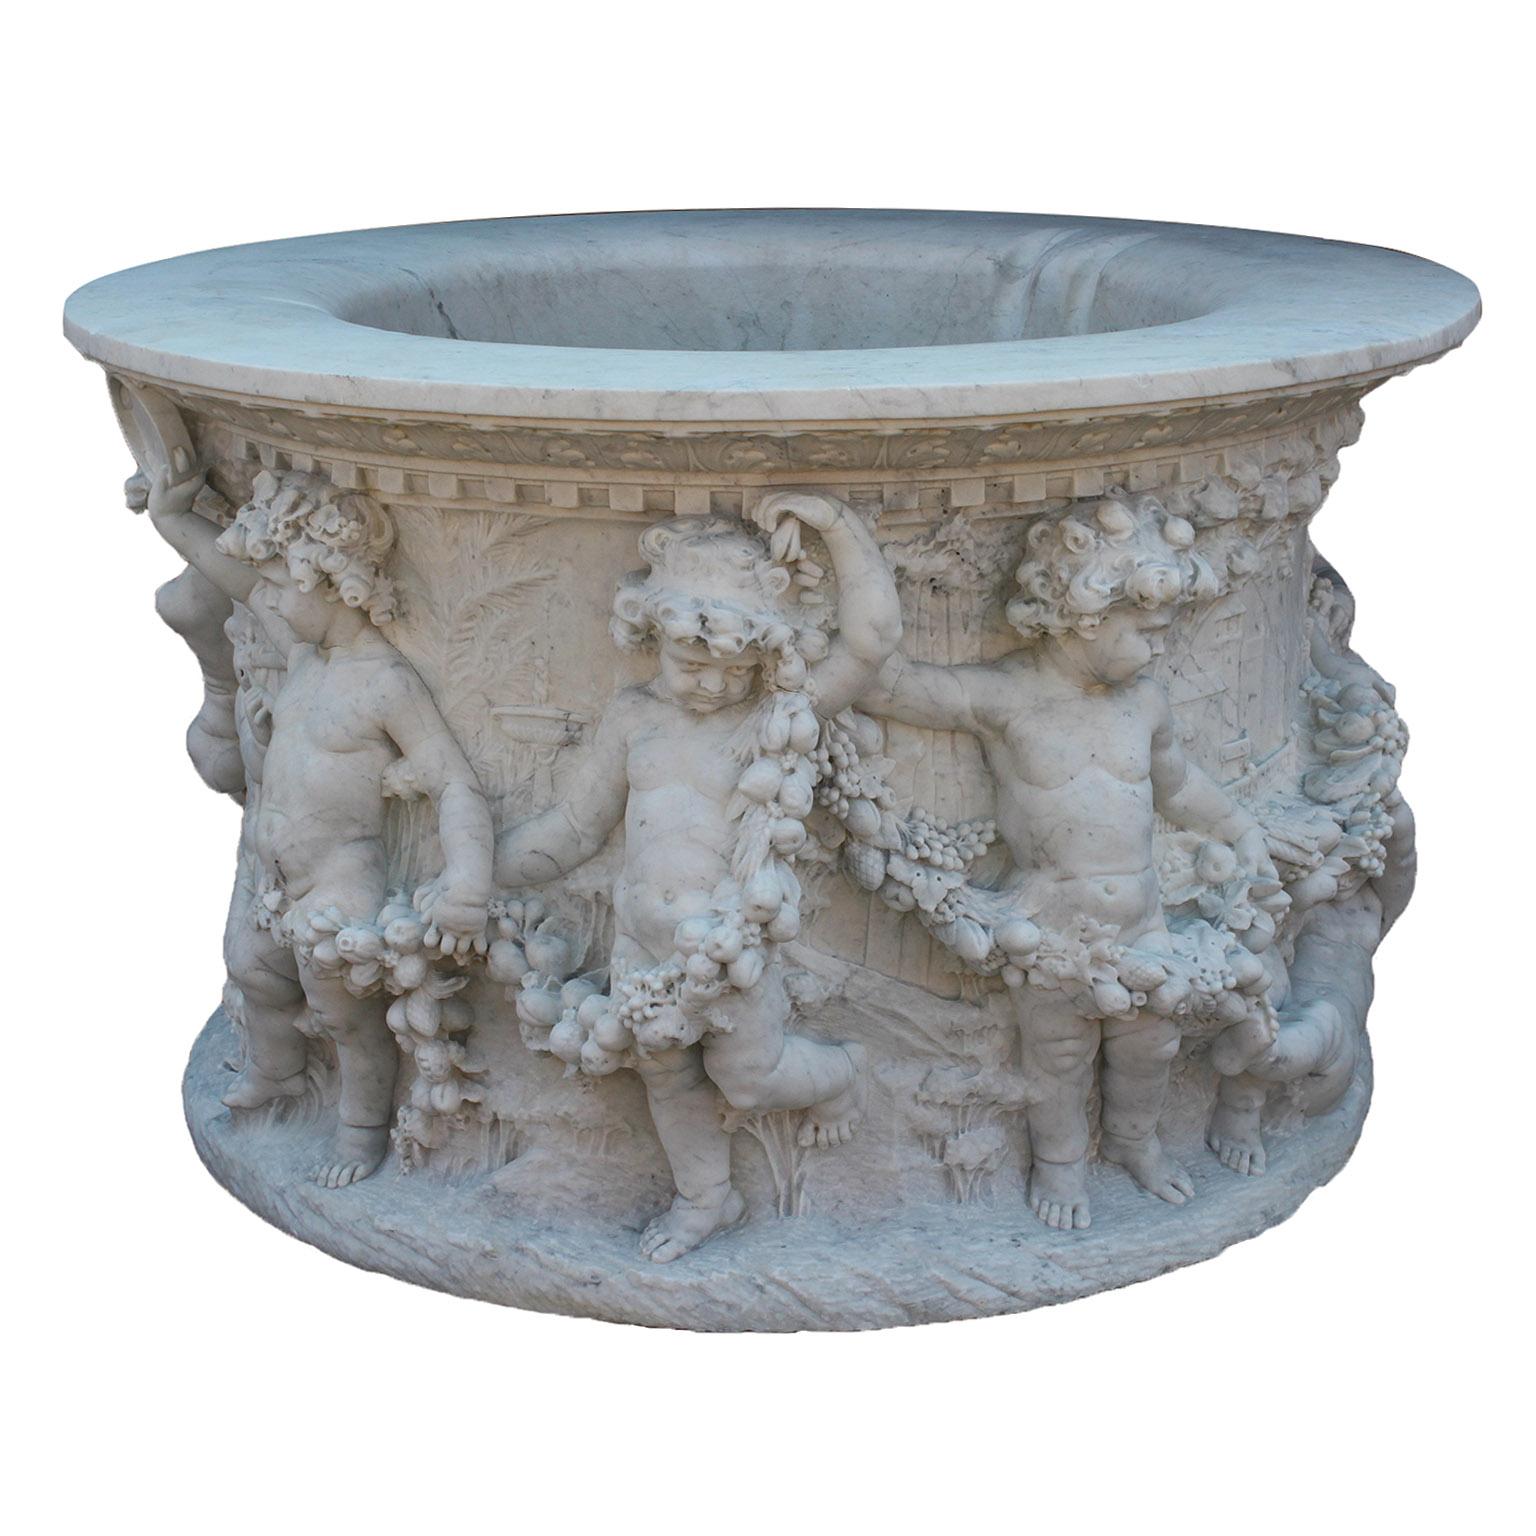 Baroque Revival Italian 19th-20th Century Whimsical White Marble Wishing Wellhead with Children For Sale